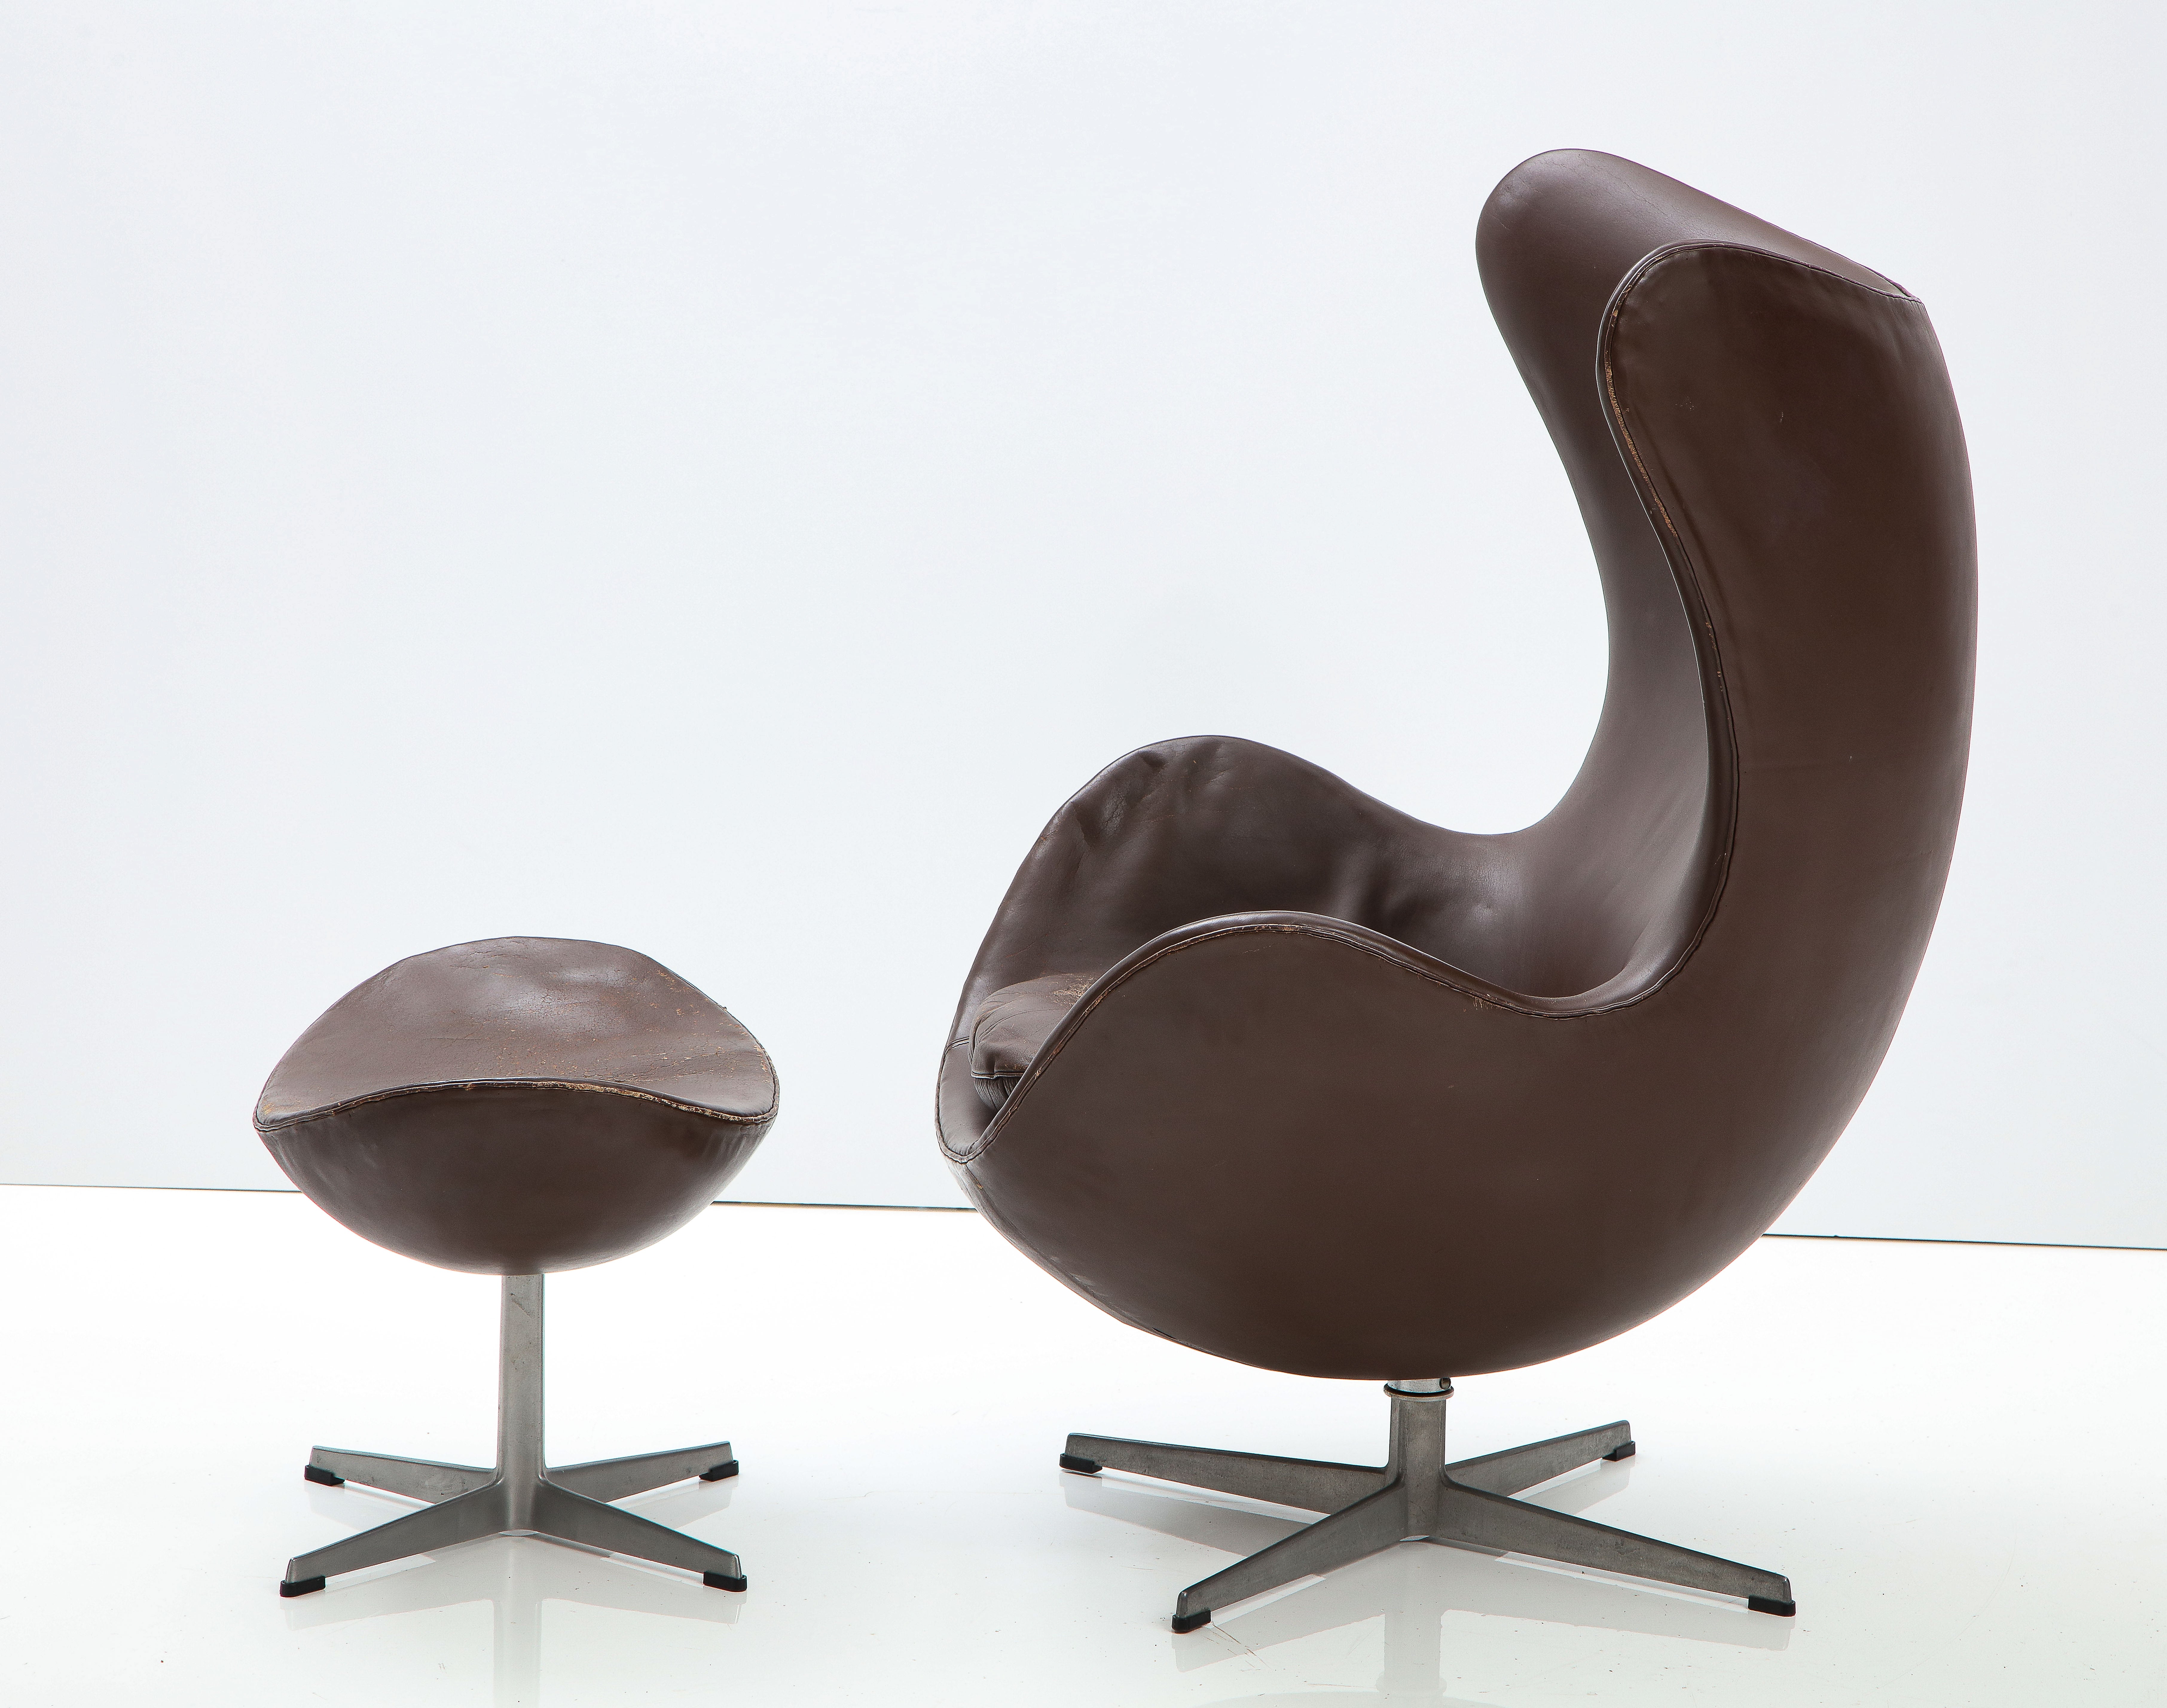 The classic and iconic 'Egg' chair and ottoman designed by Arne Jacobsen for Fritz Hansen, Denmark, 1976. Made in Denmark by Fritz Hansen, 1976. With it's original chocolate brown leather upholstery. 

The Egg was originally designed in 1958 for